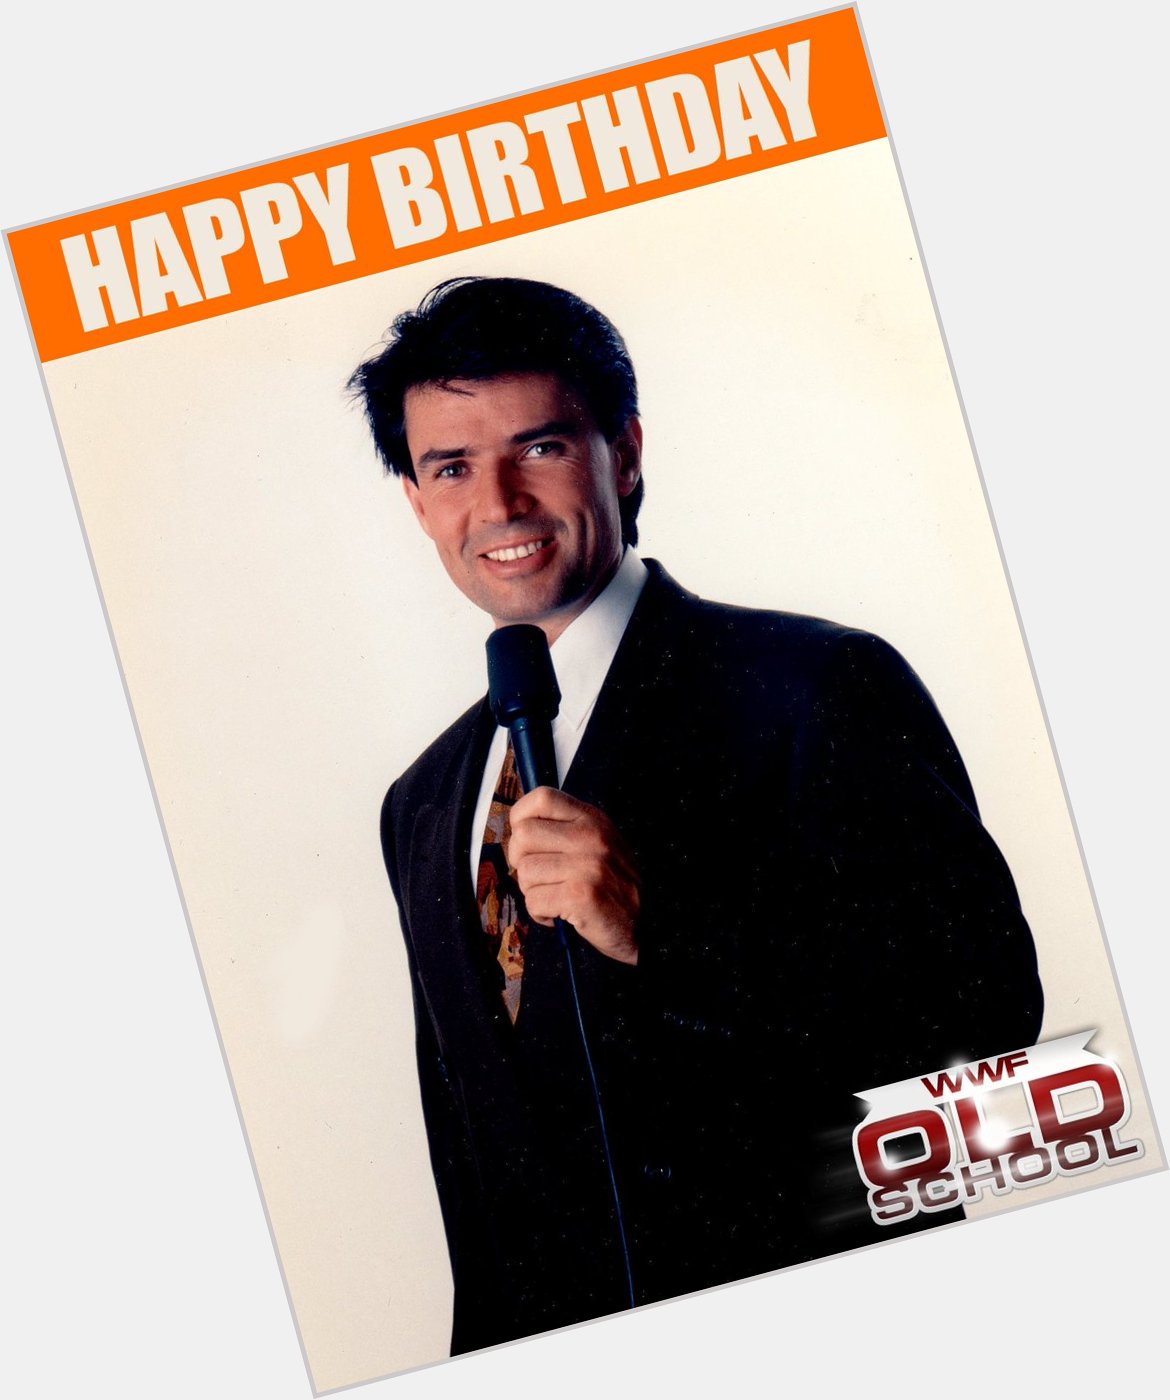 Former WCW President and nWo Manager Eric Bischoff turns 67 today.

HAPPY BIRTHDAY    